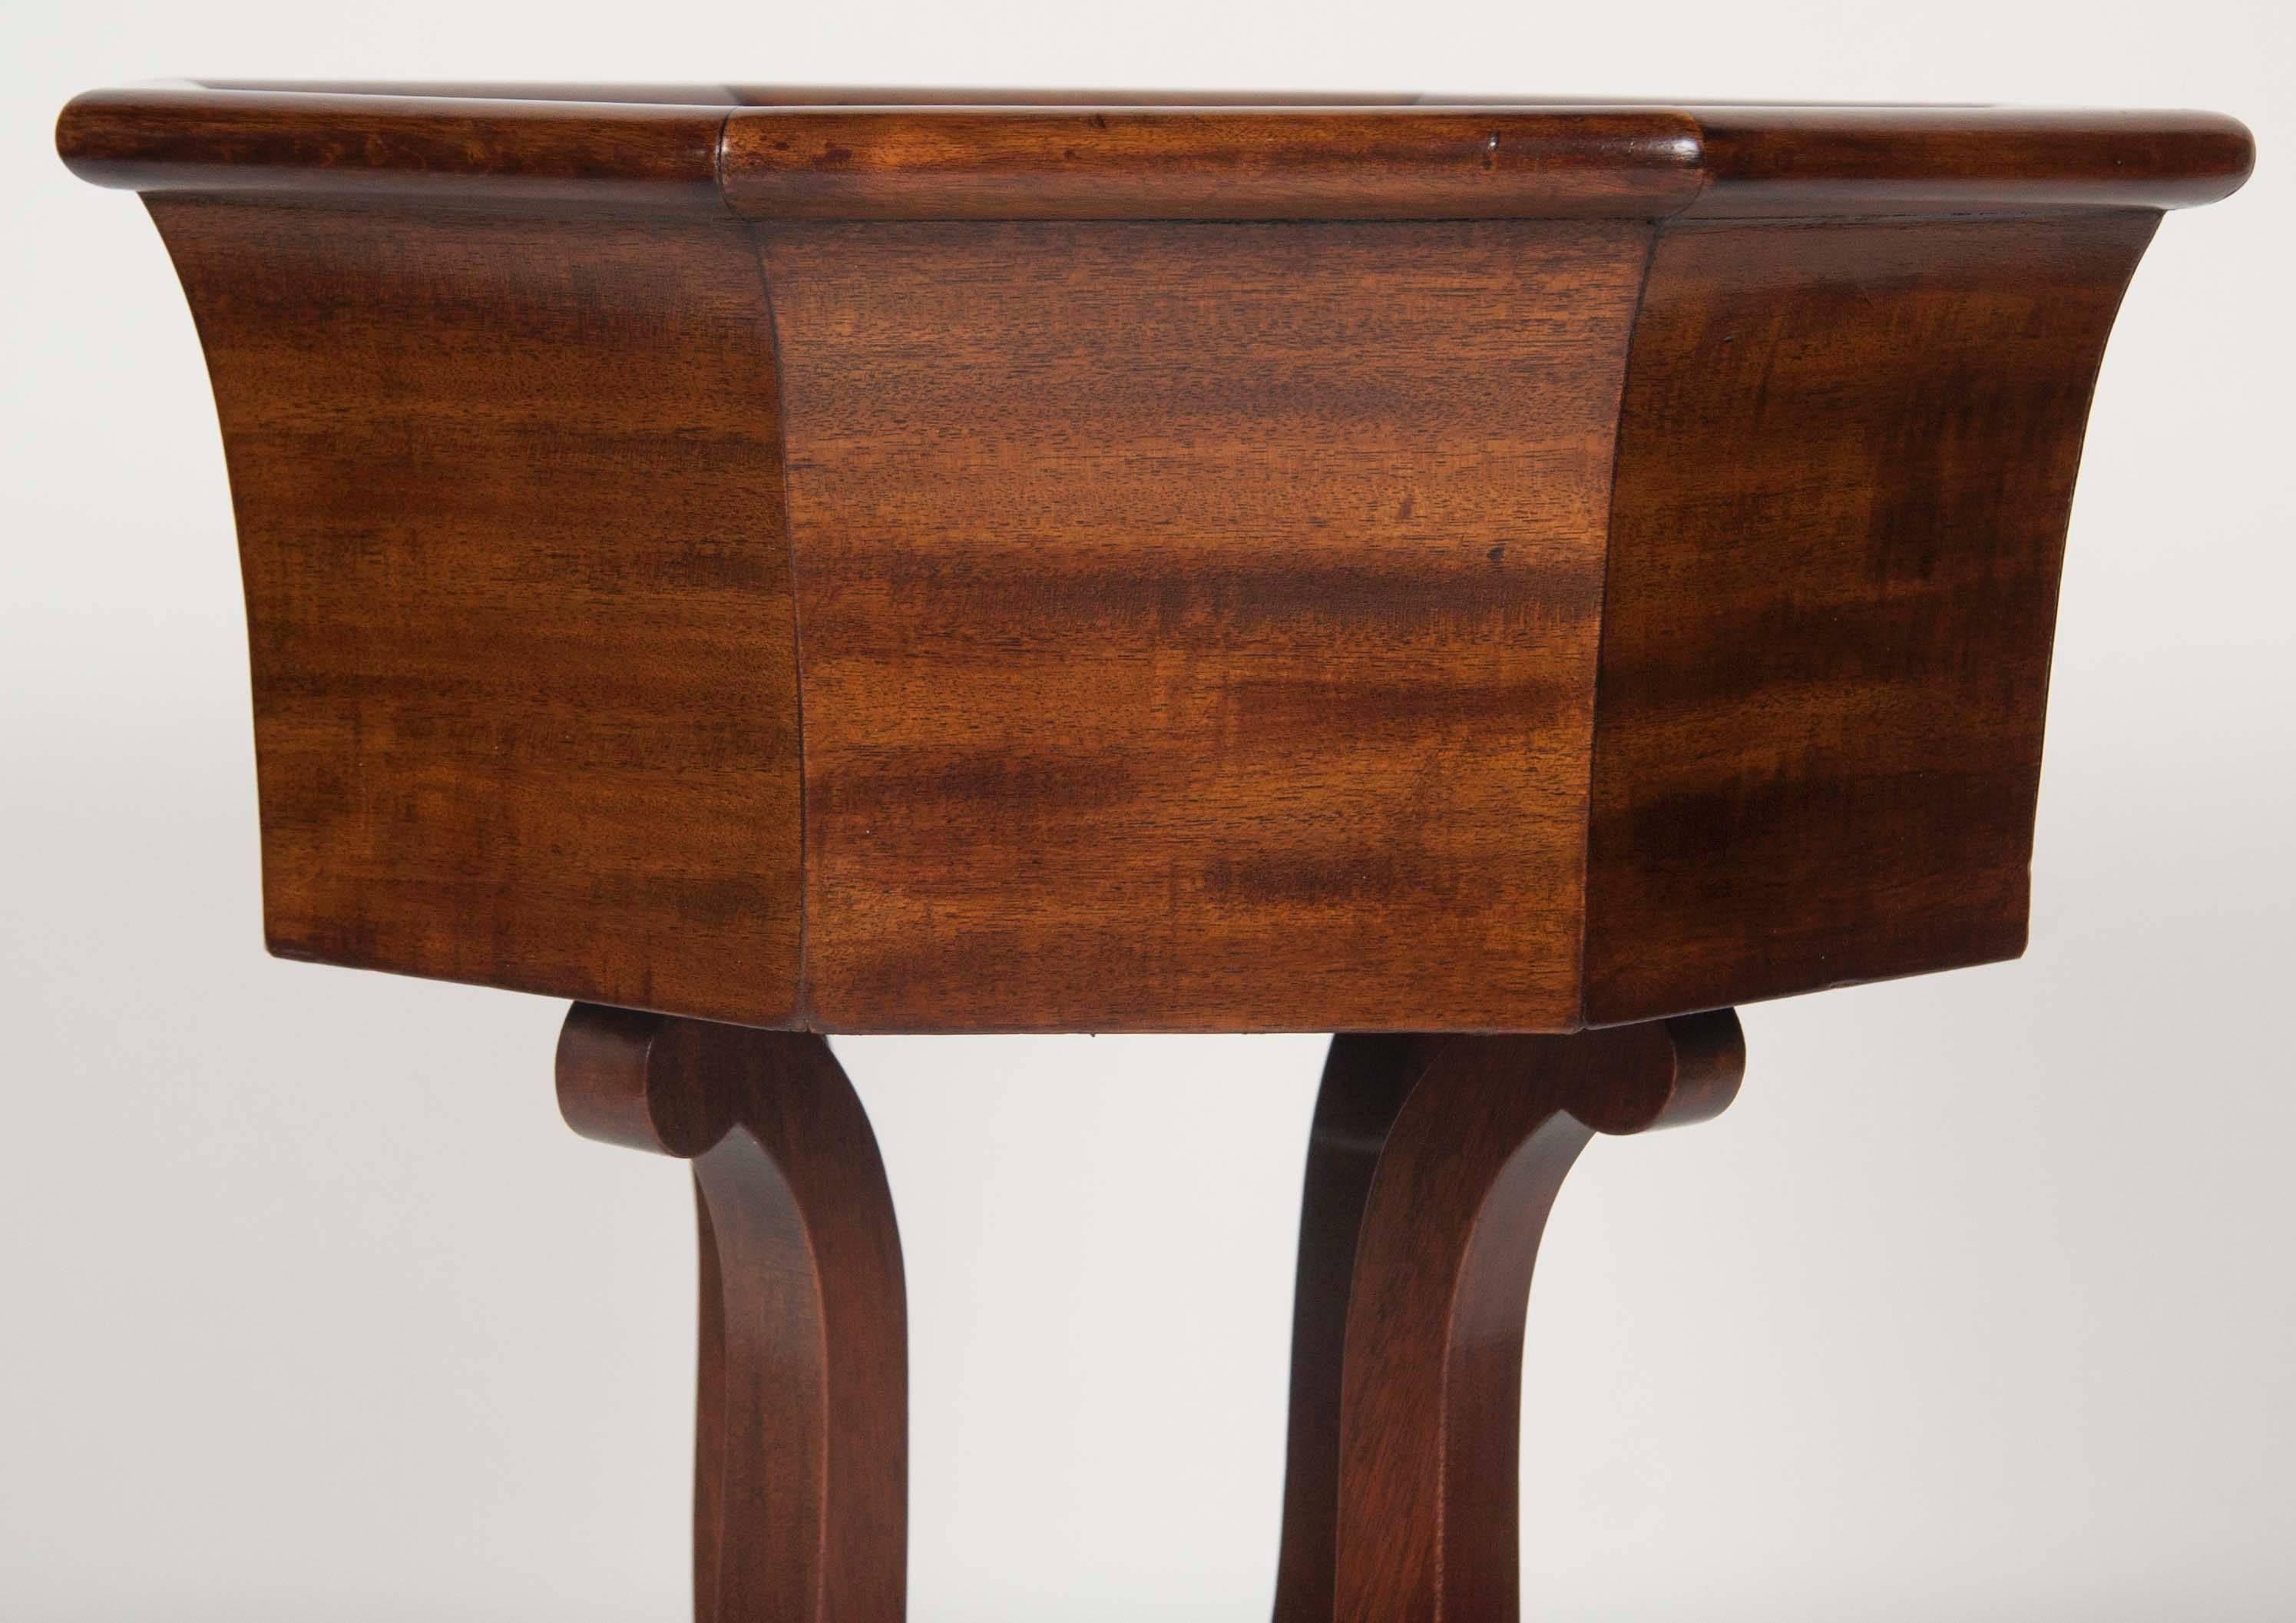 Mid-19th Century American Mahogany Octagonal Jardinière with Liner